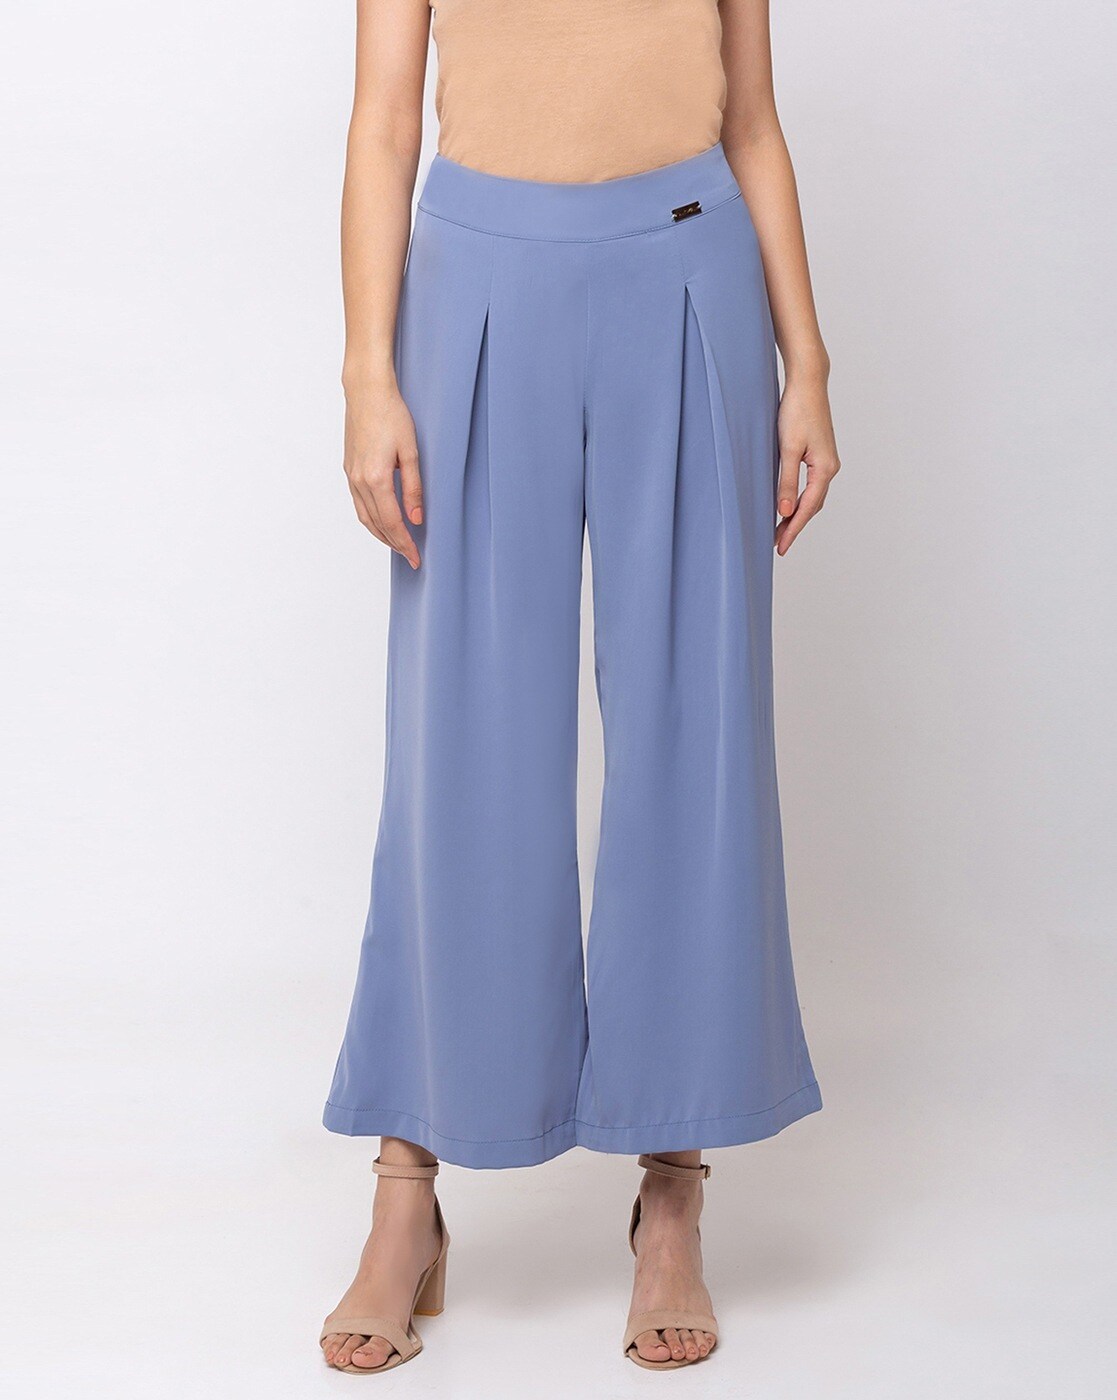 Flared Trousers  Buy Flared Trousers online in India